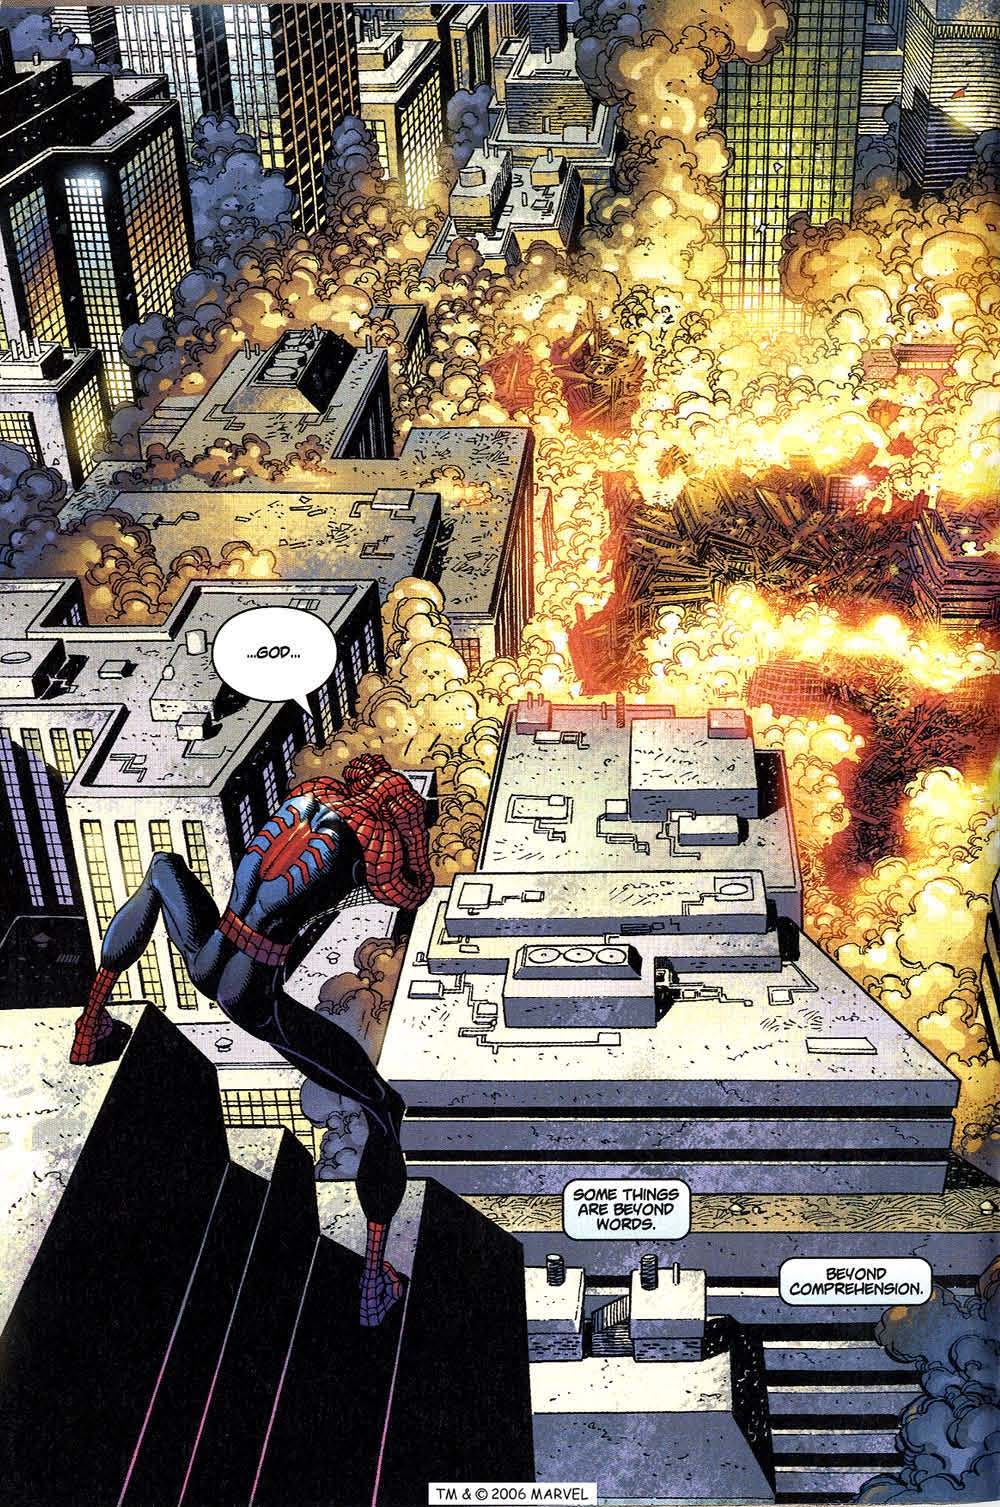 Comic book page showing Spider-Man above the collapsing World Trade Center. Text: '...God ... some things are beyond words ... beyond comprehension'